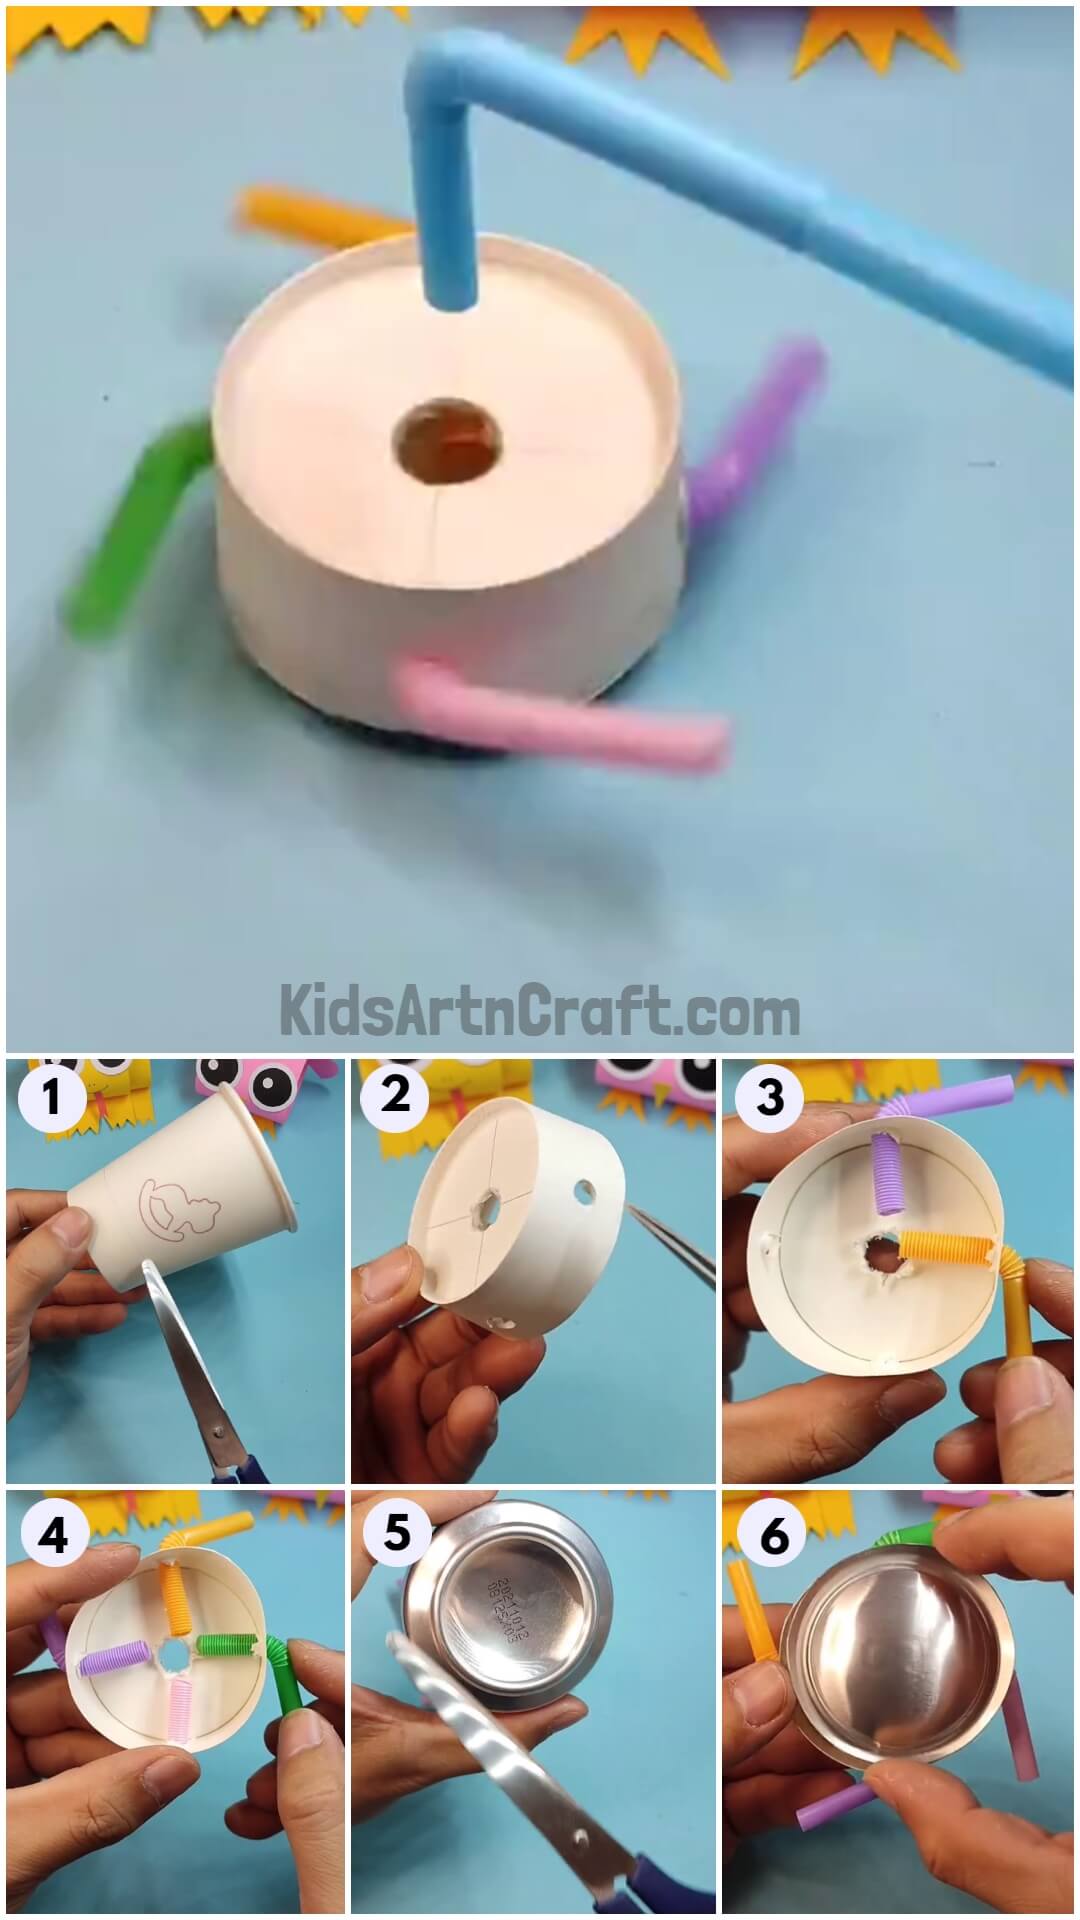  Easy spinning toy from paper cup and straws for kids